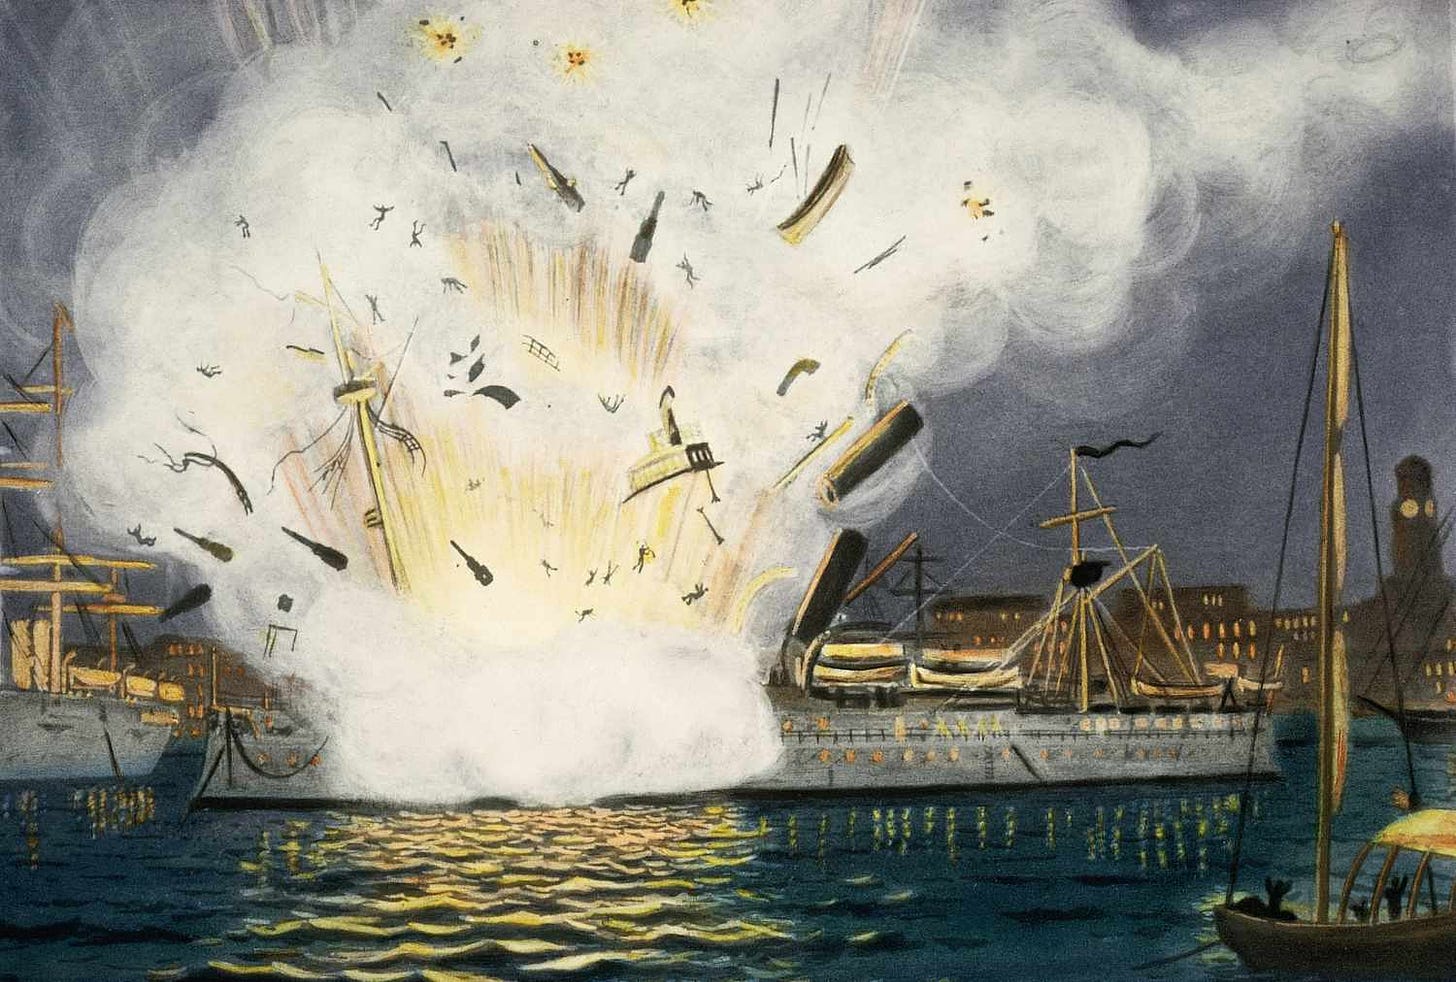 USS Maine Explosion and the Spanish-American War